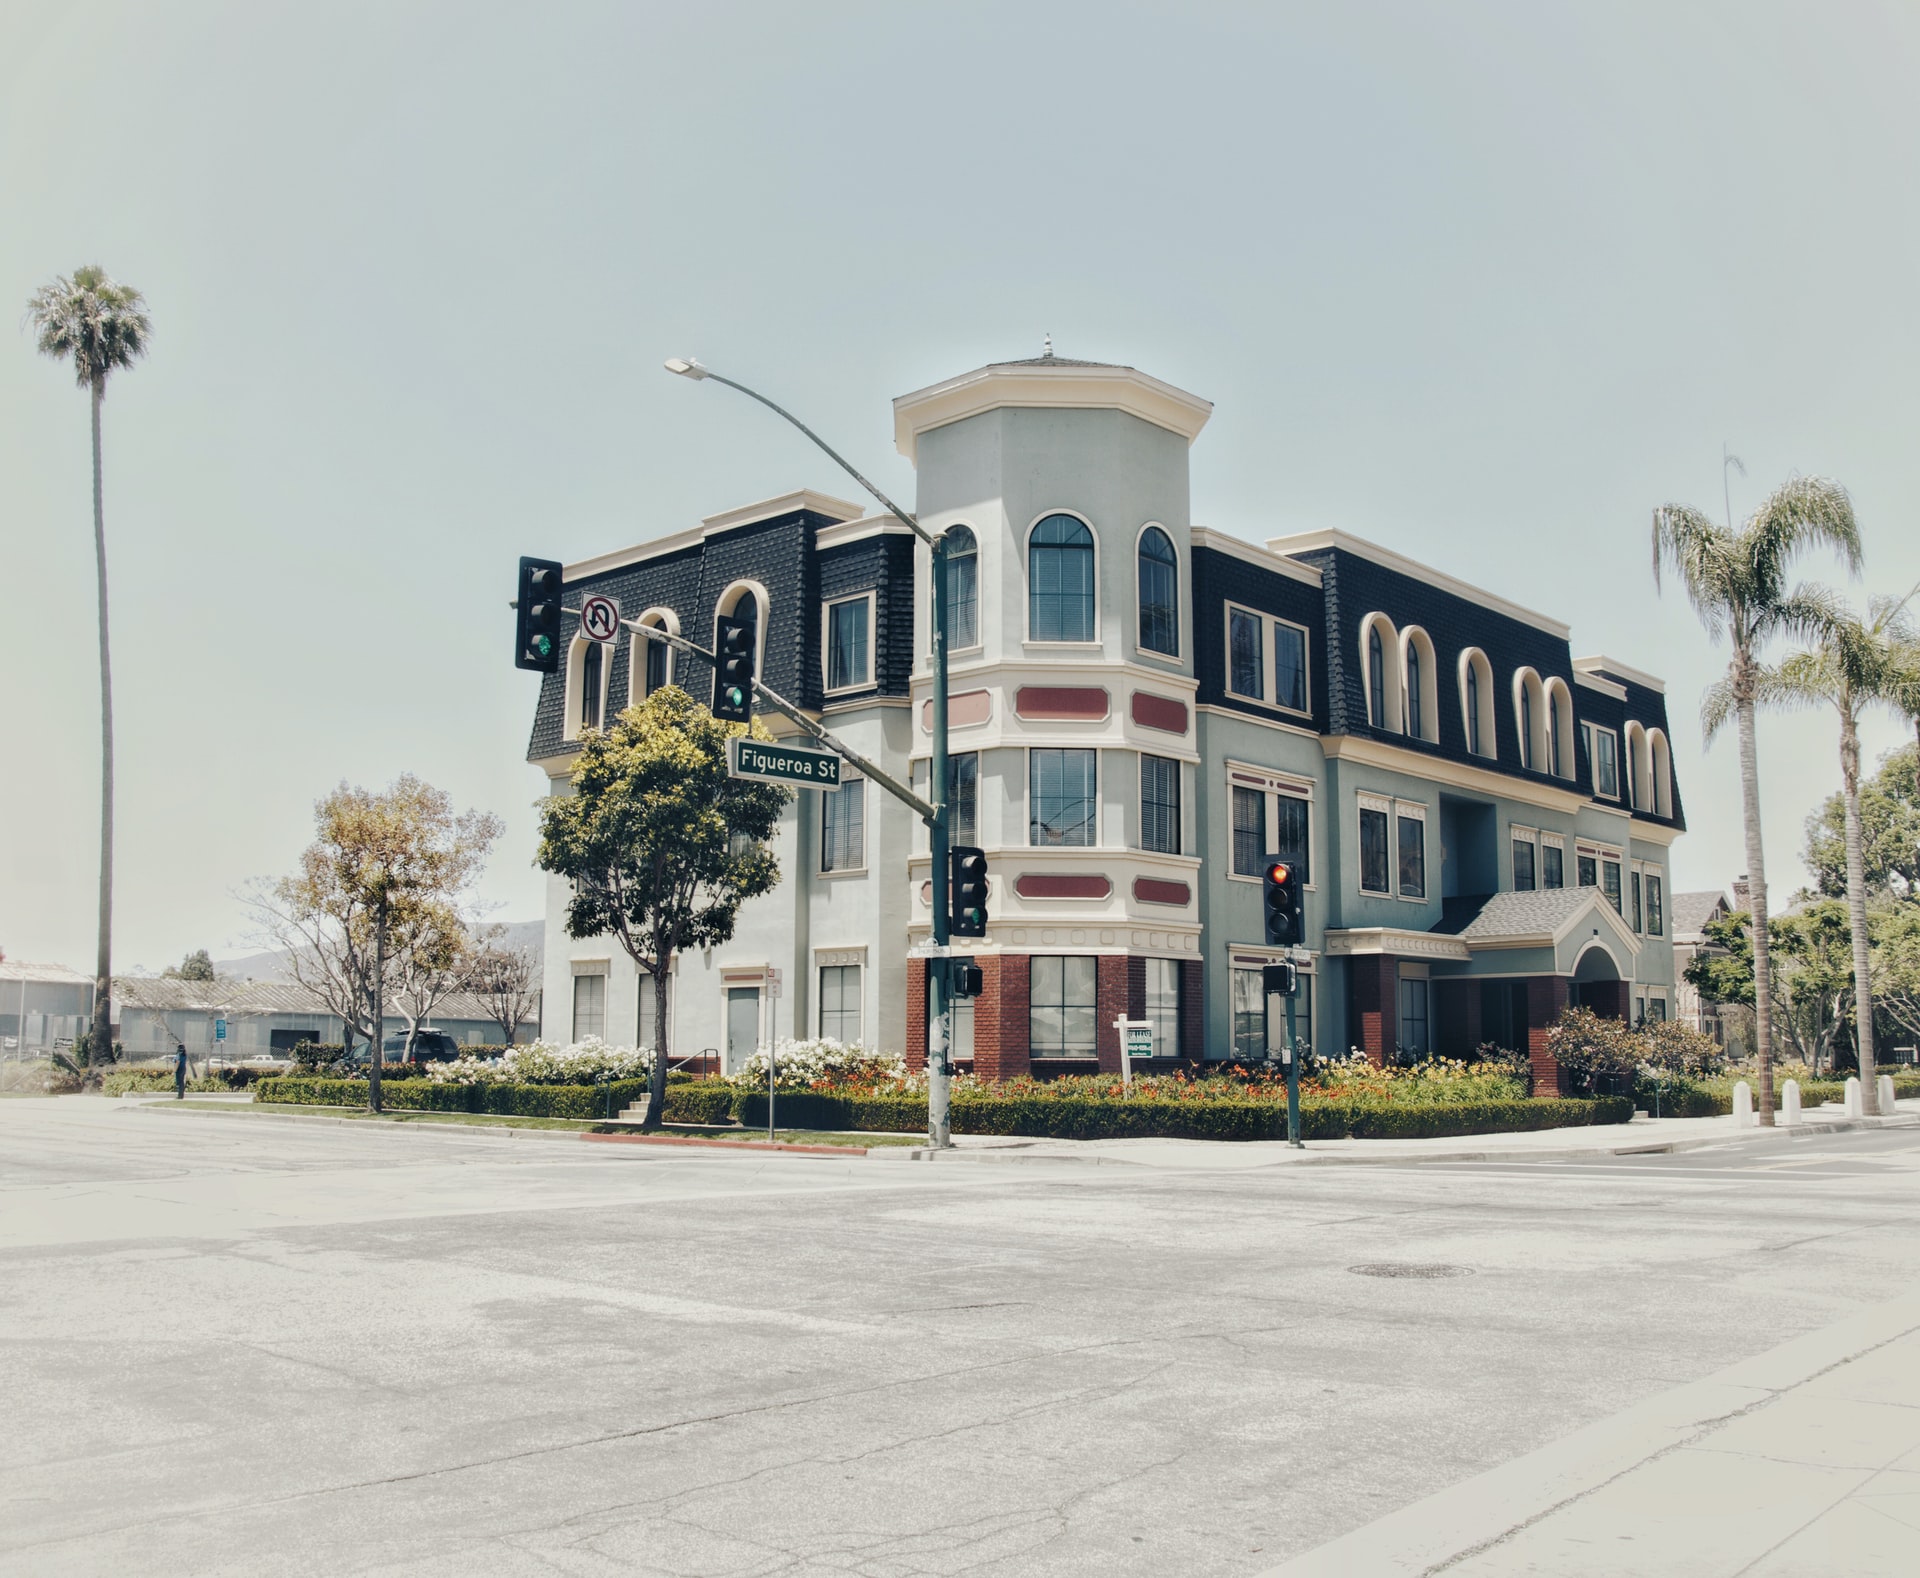 Building on a palm lined street corner in Ventura, CA.